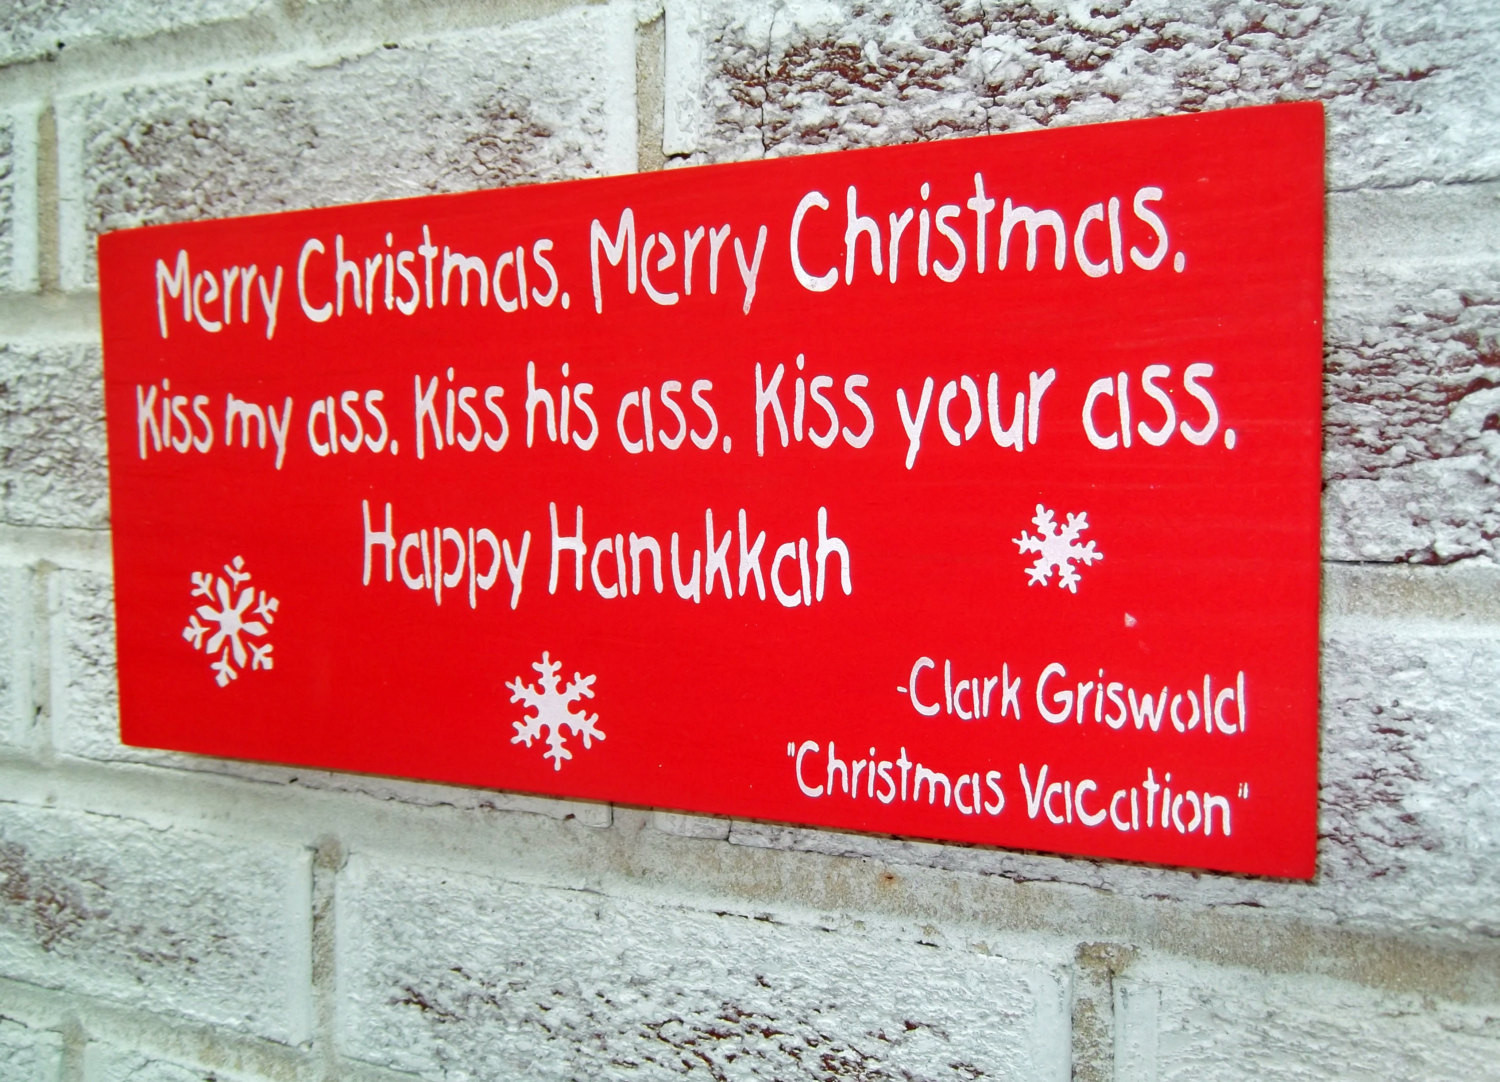 Clark Griswold Quotes Christmas Vacation
 Items similar to Clark Griswold Christmas Vacation quote